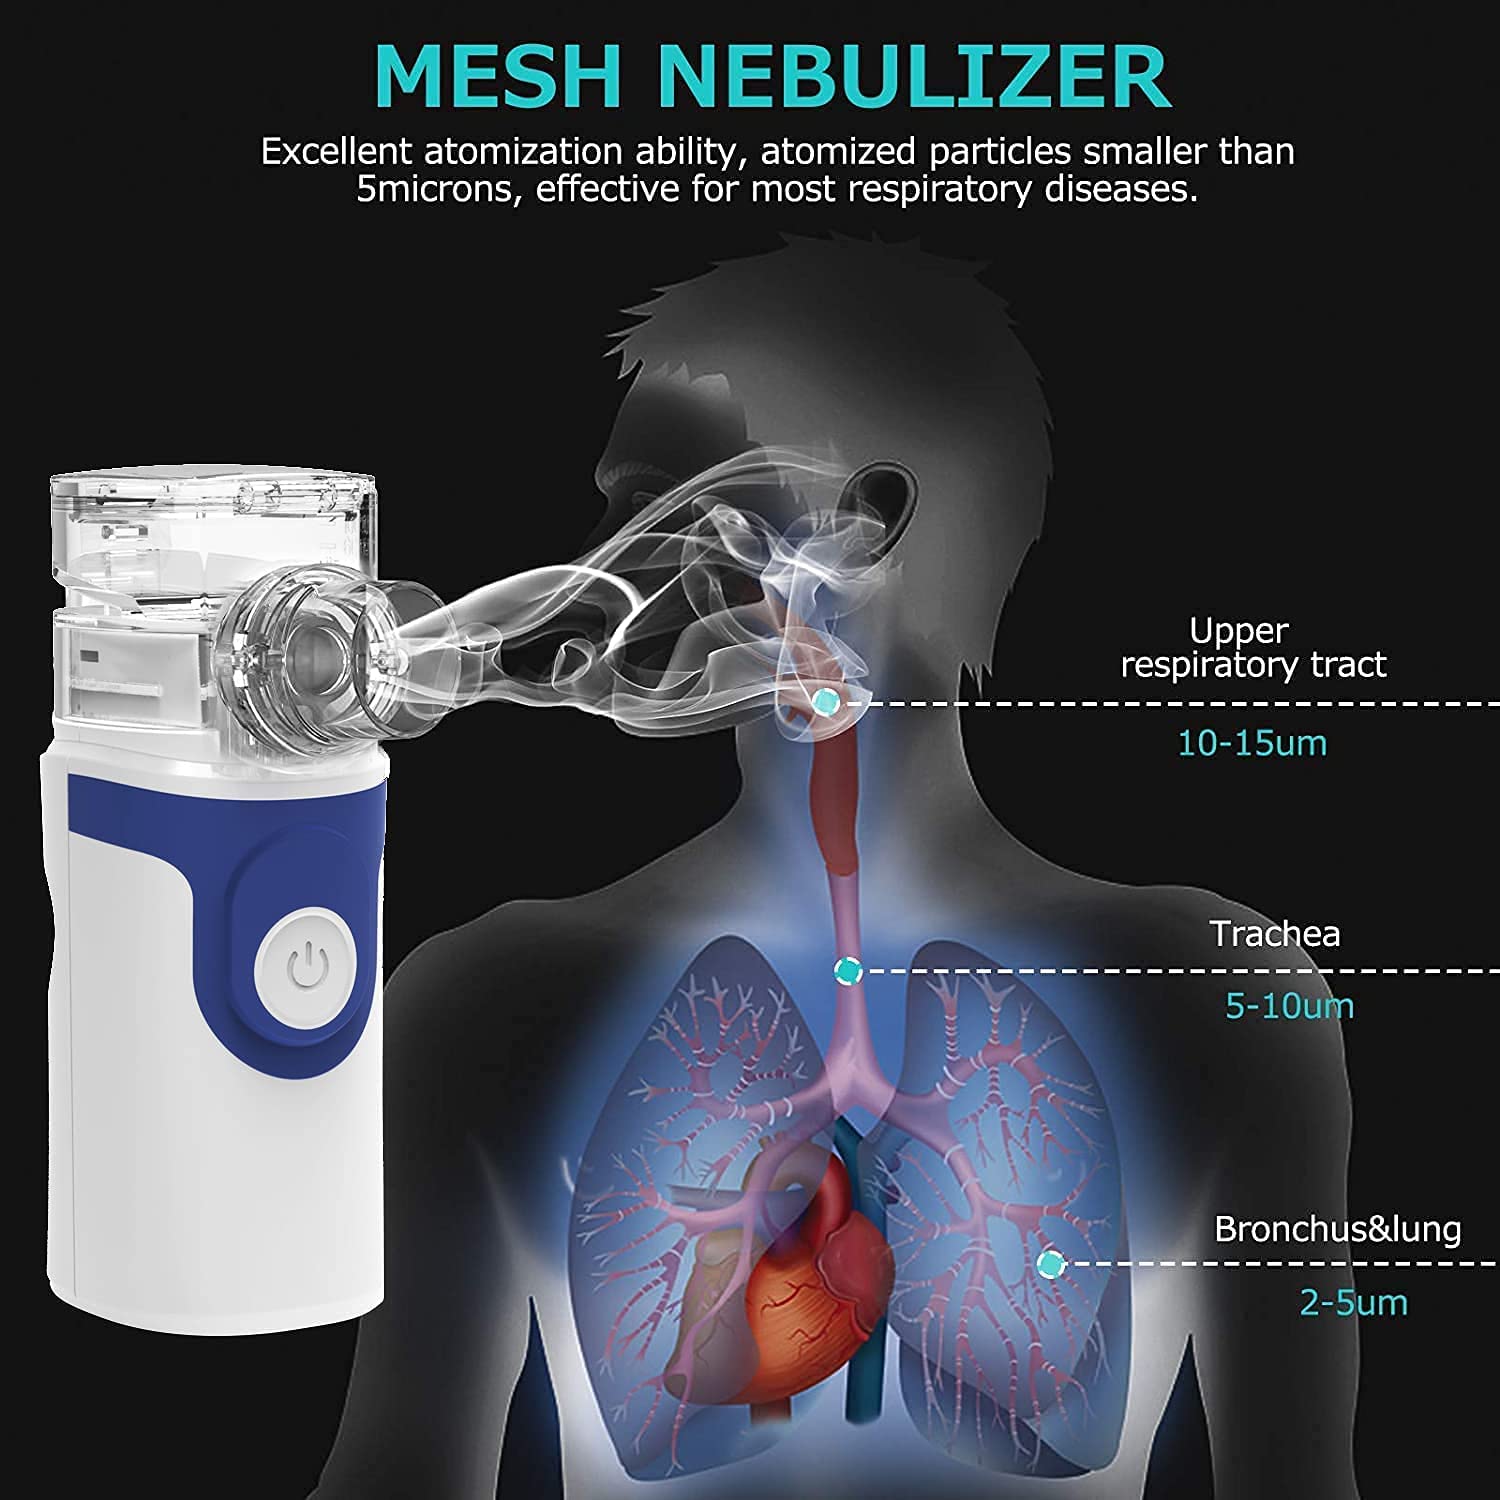 GZSYIK Portable Nebulizer, Cool Mist Steam Inhaler for Moisture, USB/Battery Operated Nebulizer Machine for Adults and Kids Home Office Travel Use